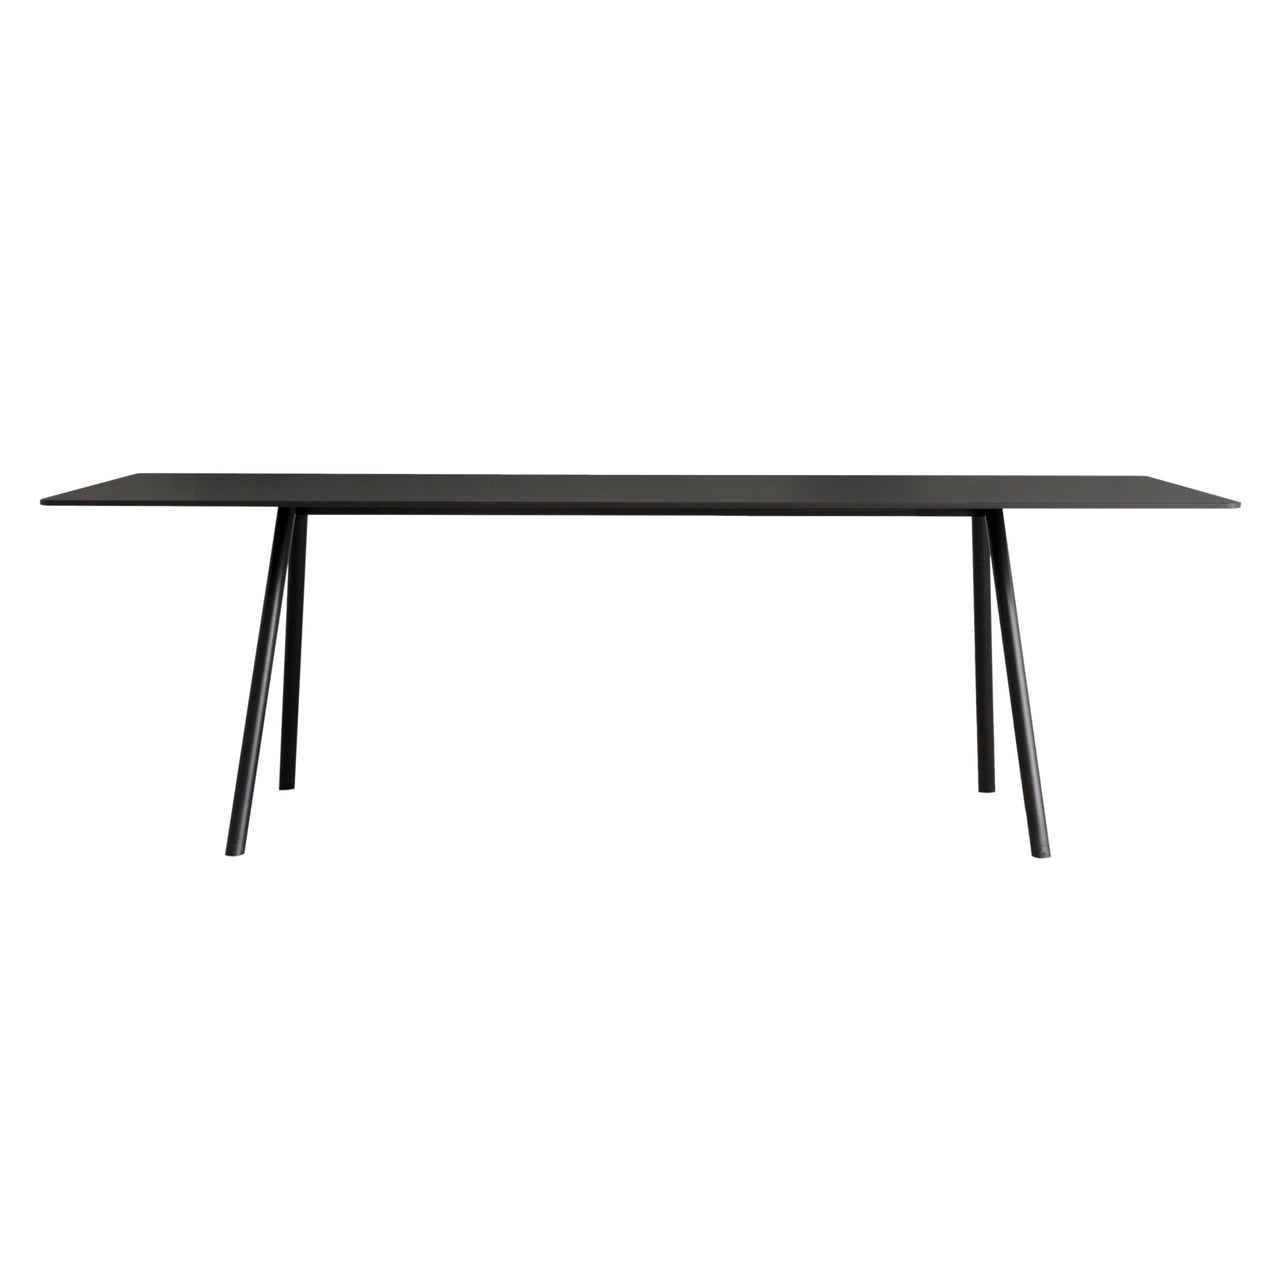 A.T.S. Table: Outdoor + Black + L Angle